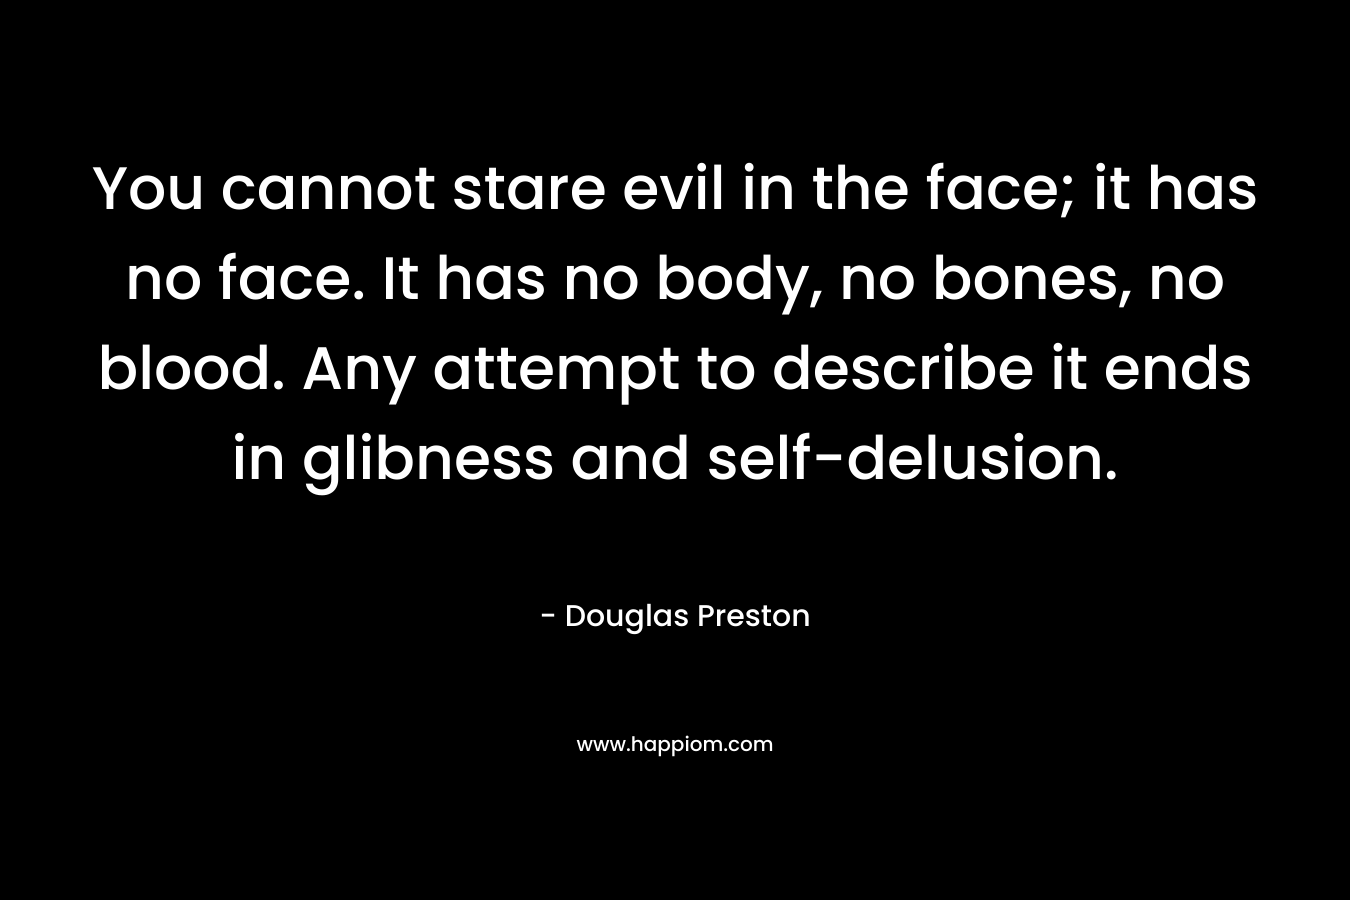 You cannot stare evil in the face; it has no face. It has no body, no bones, no blood. Any attempt to describe it ends in glibness and self-delusion.